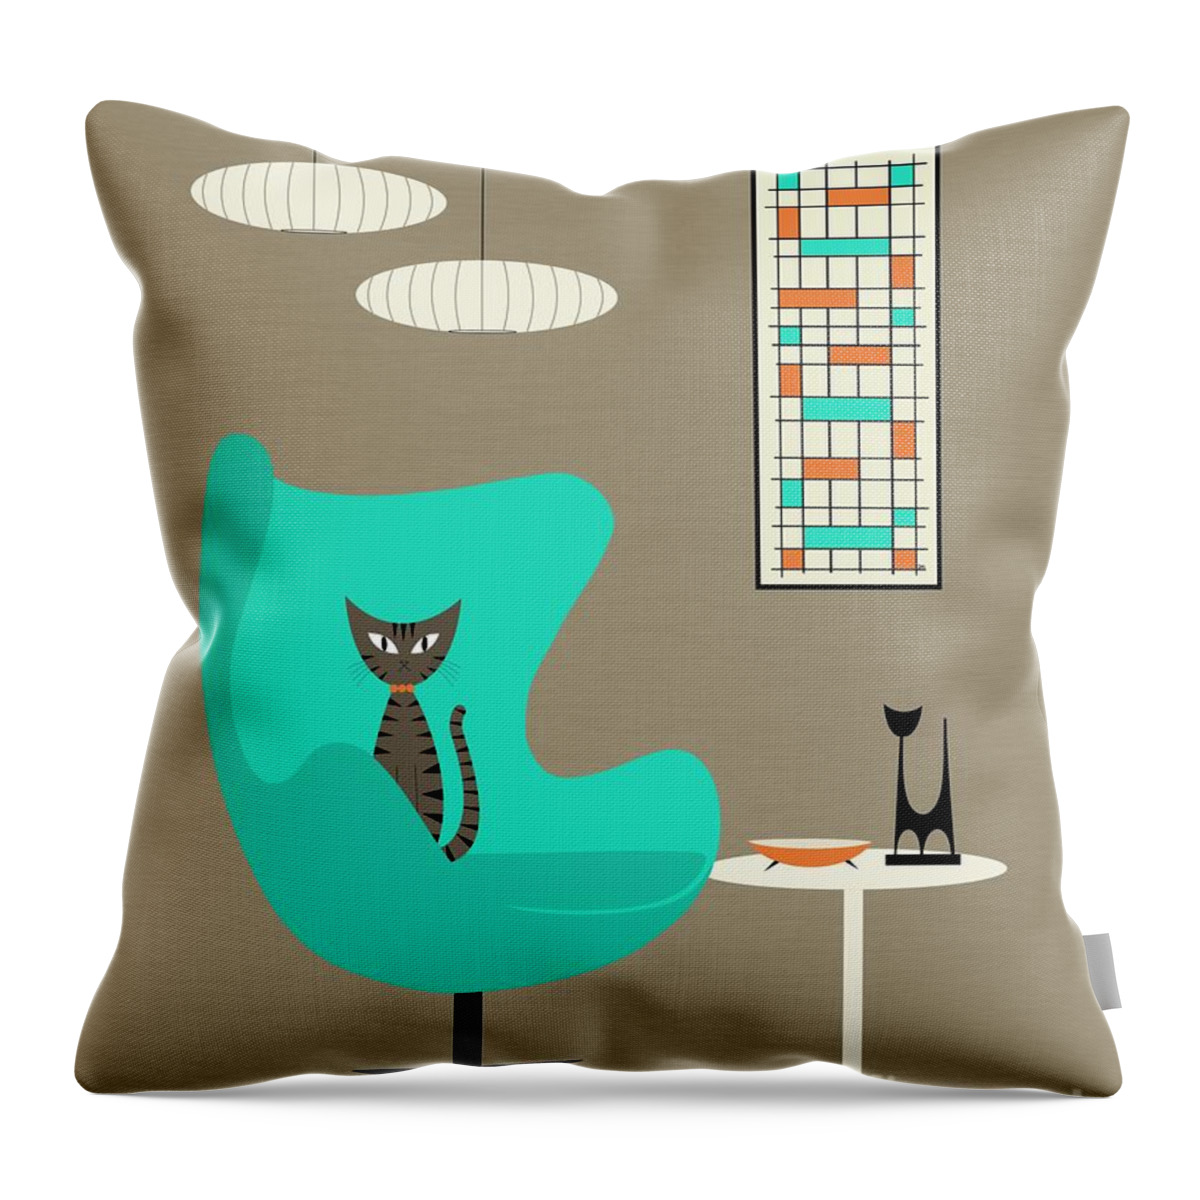  Throw Pillow featuring the digital art Tabby by Donna Mibus